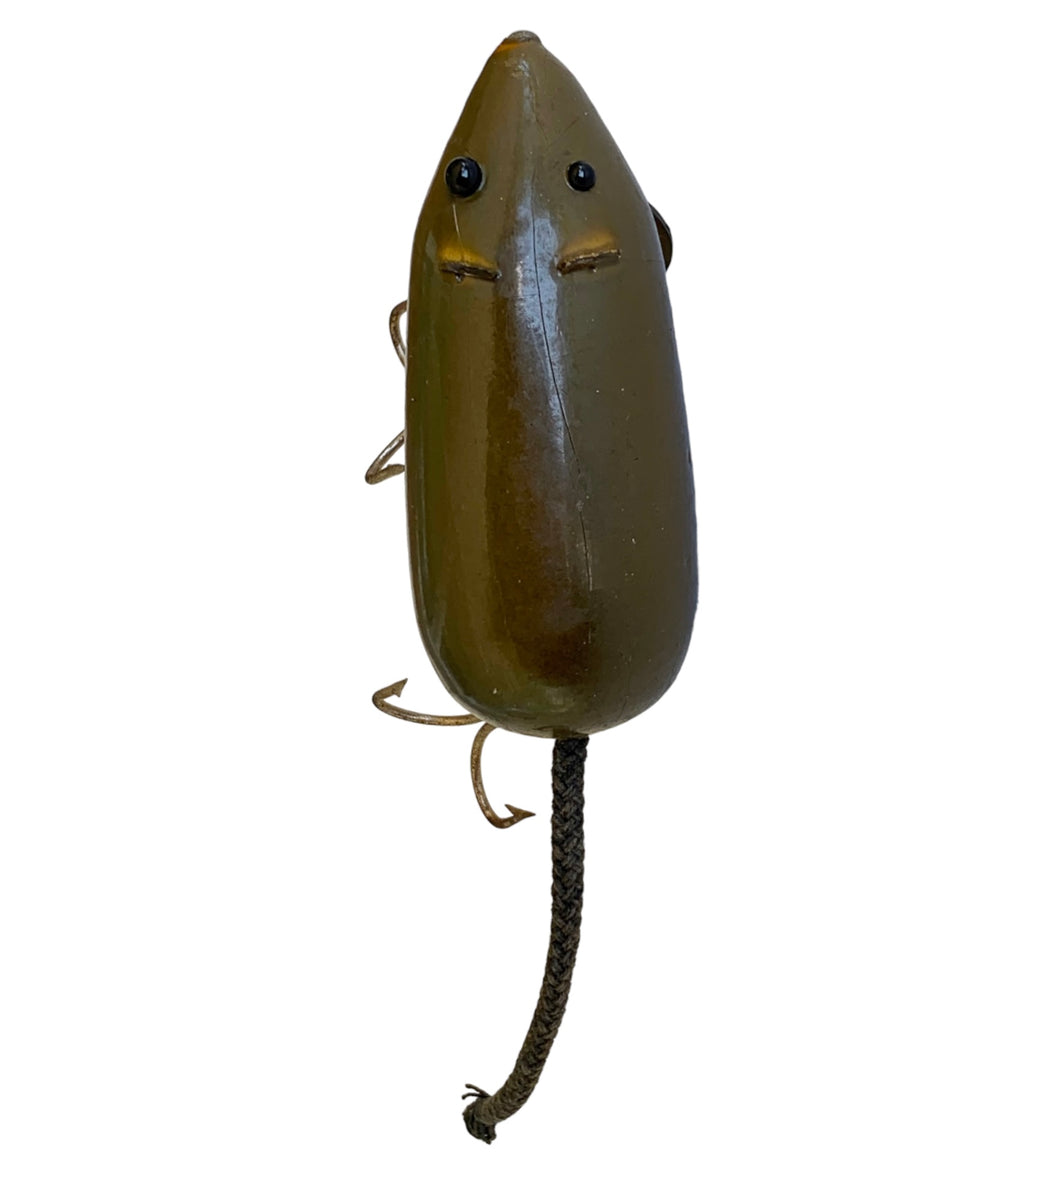 Top View of CREEK CHUB BAIT COMPANY (C.C.B.CO.) MOUSE Fishing Lure For Sale Online at Toad Tackle